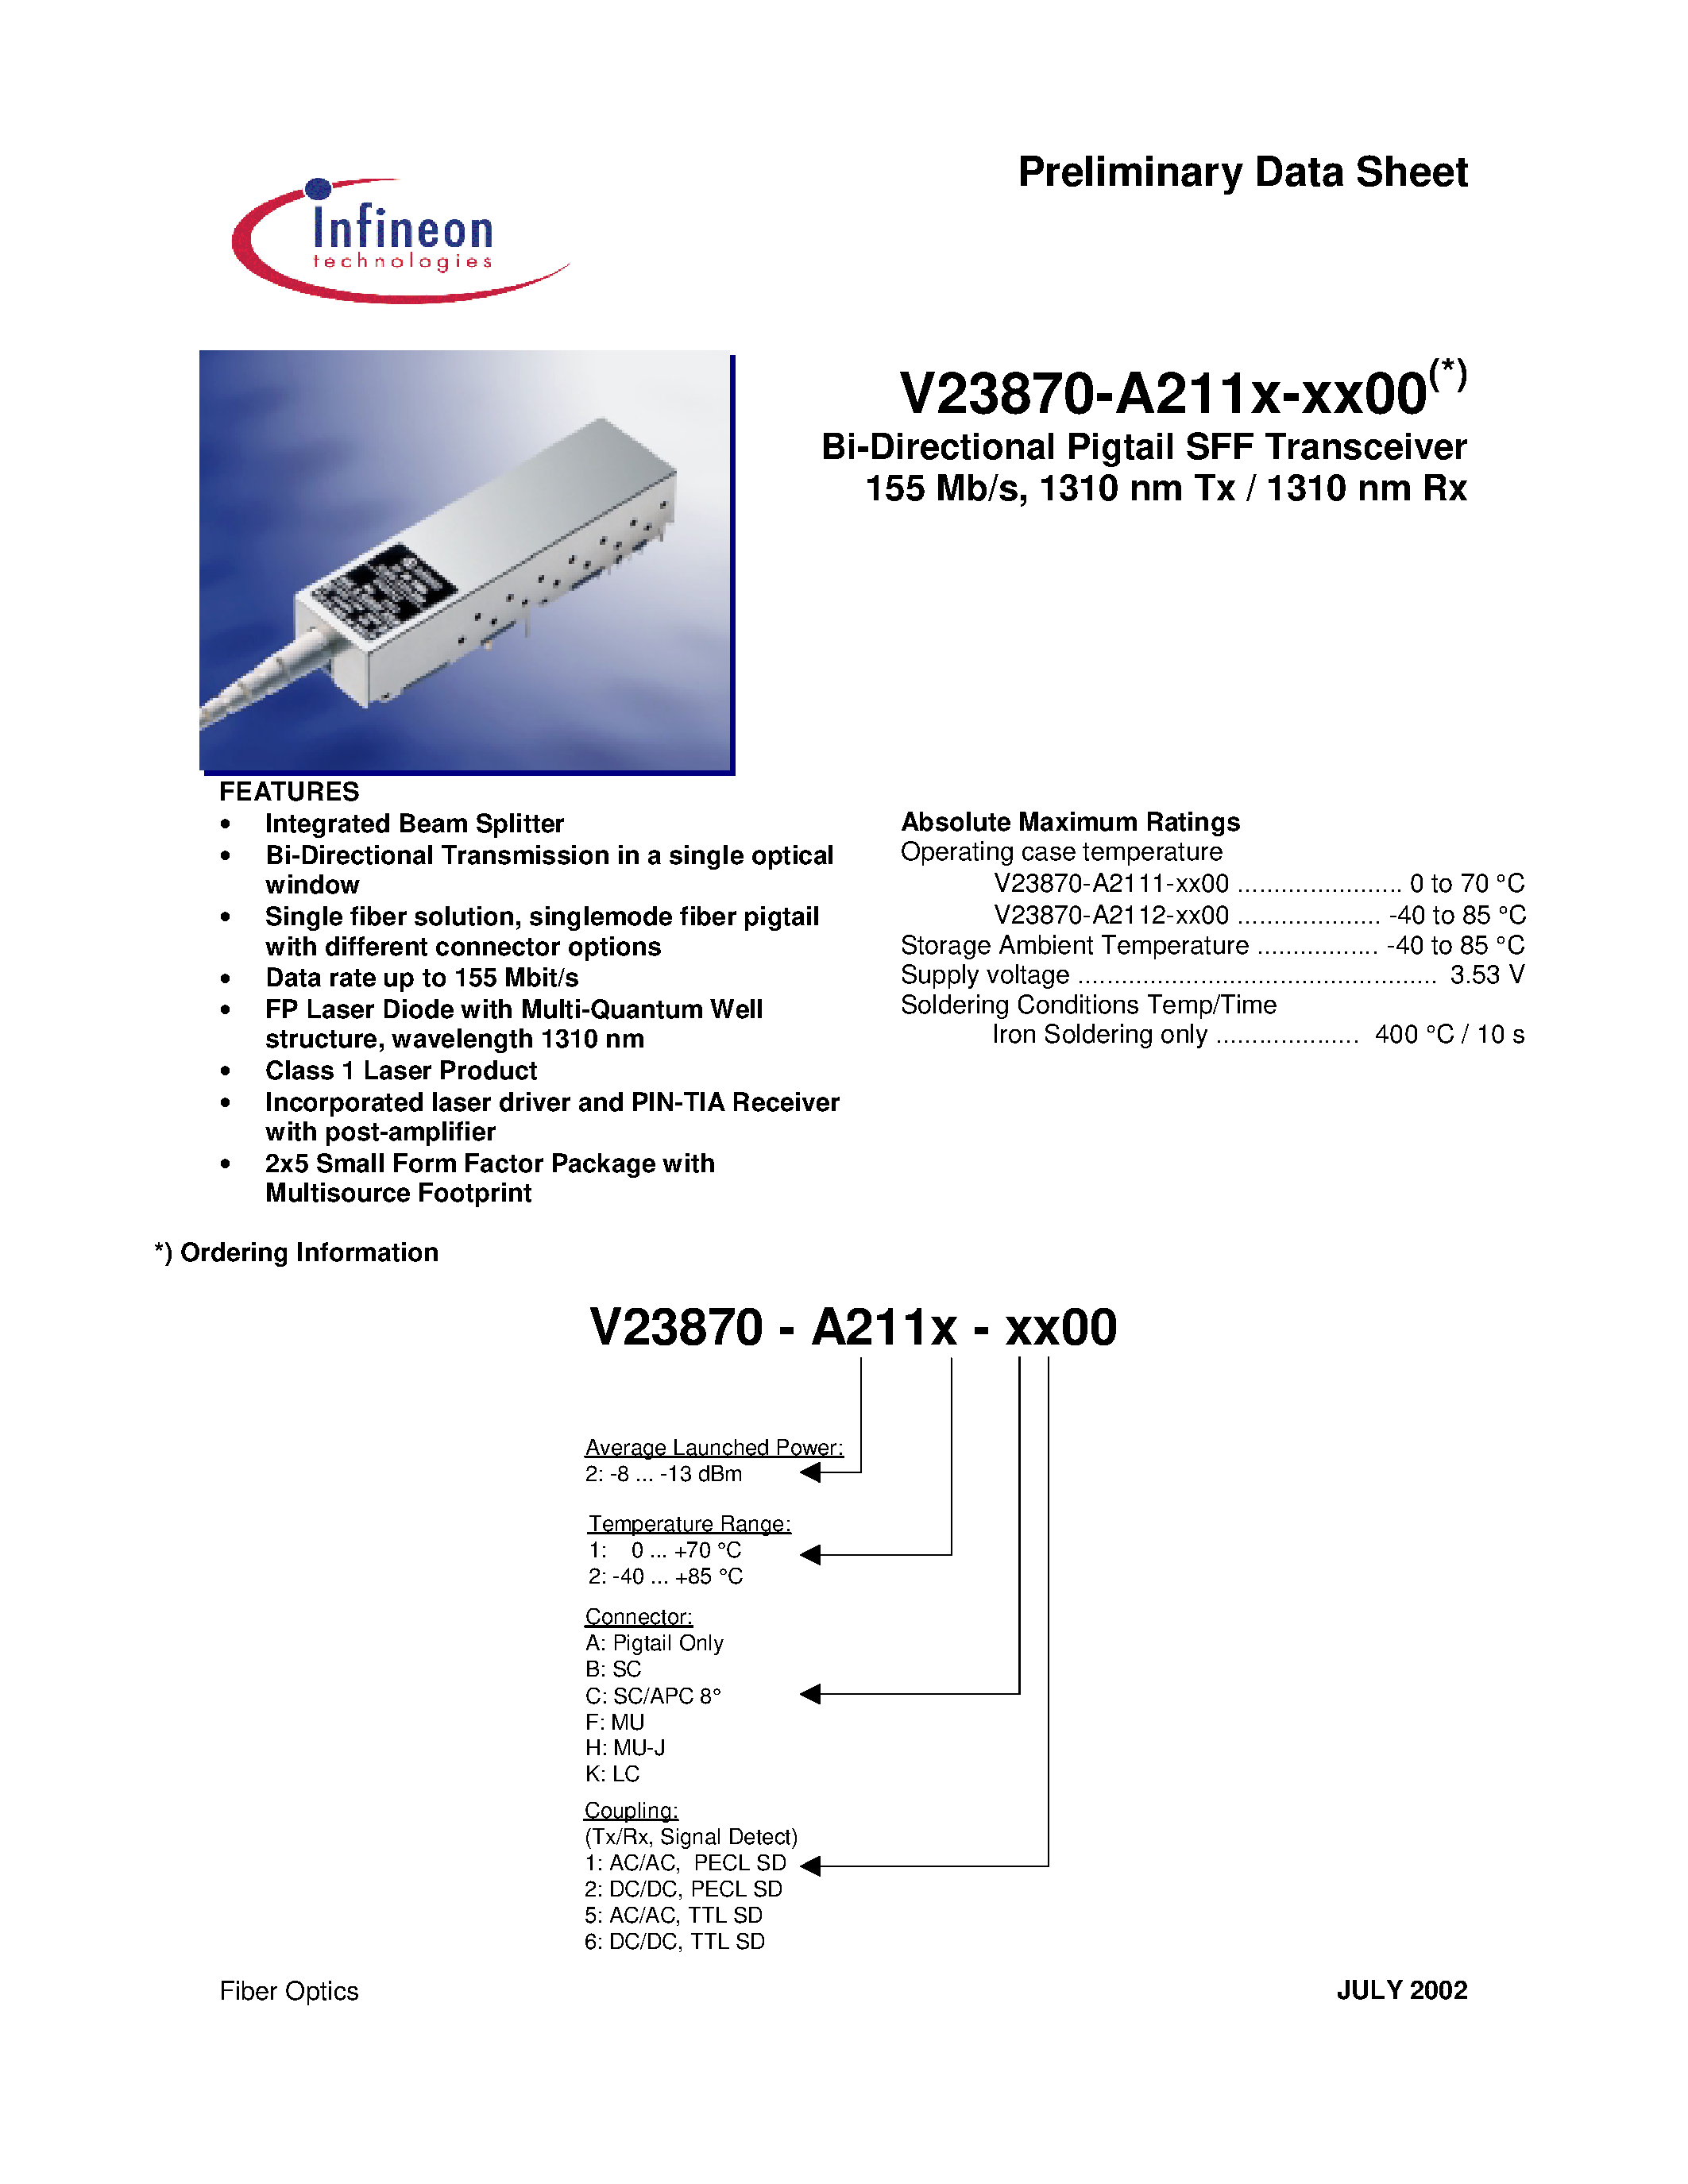 Datasheet V23870-A2111-B500 - Bi-Directional Pigtail SFF Transceiver 155 Mb/s/ 1310 nm Tx / 1310 nm Rx page 1